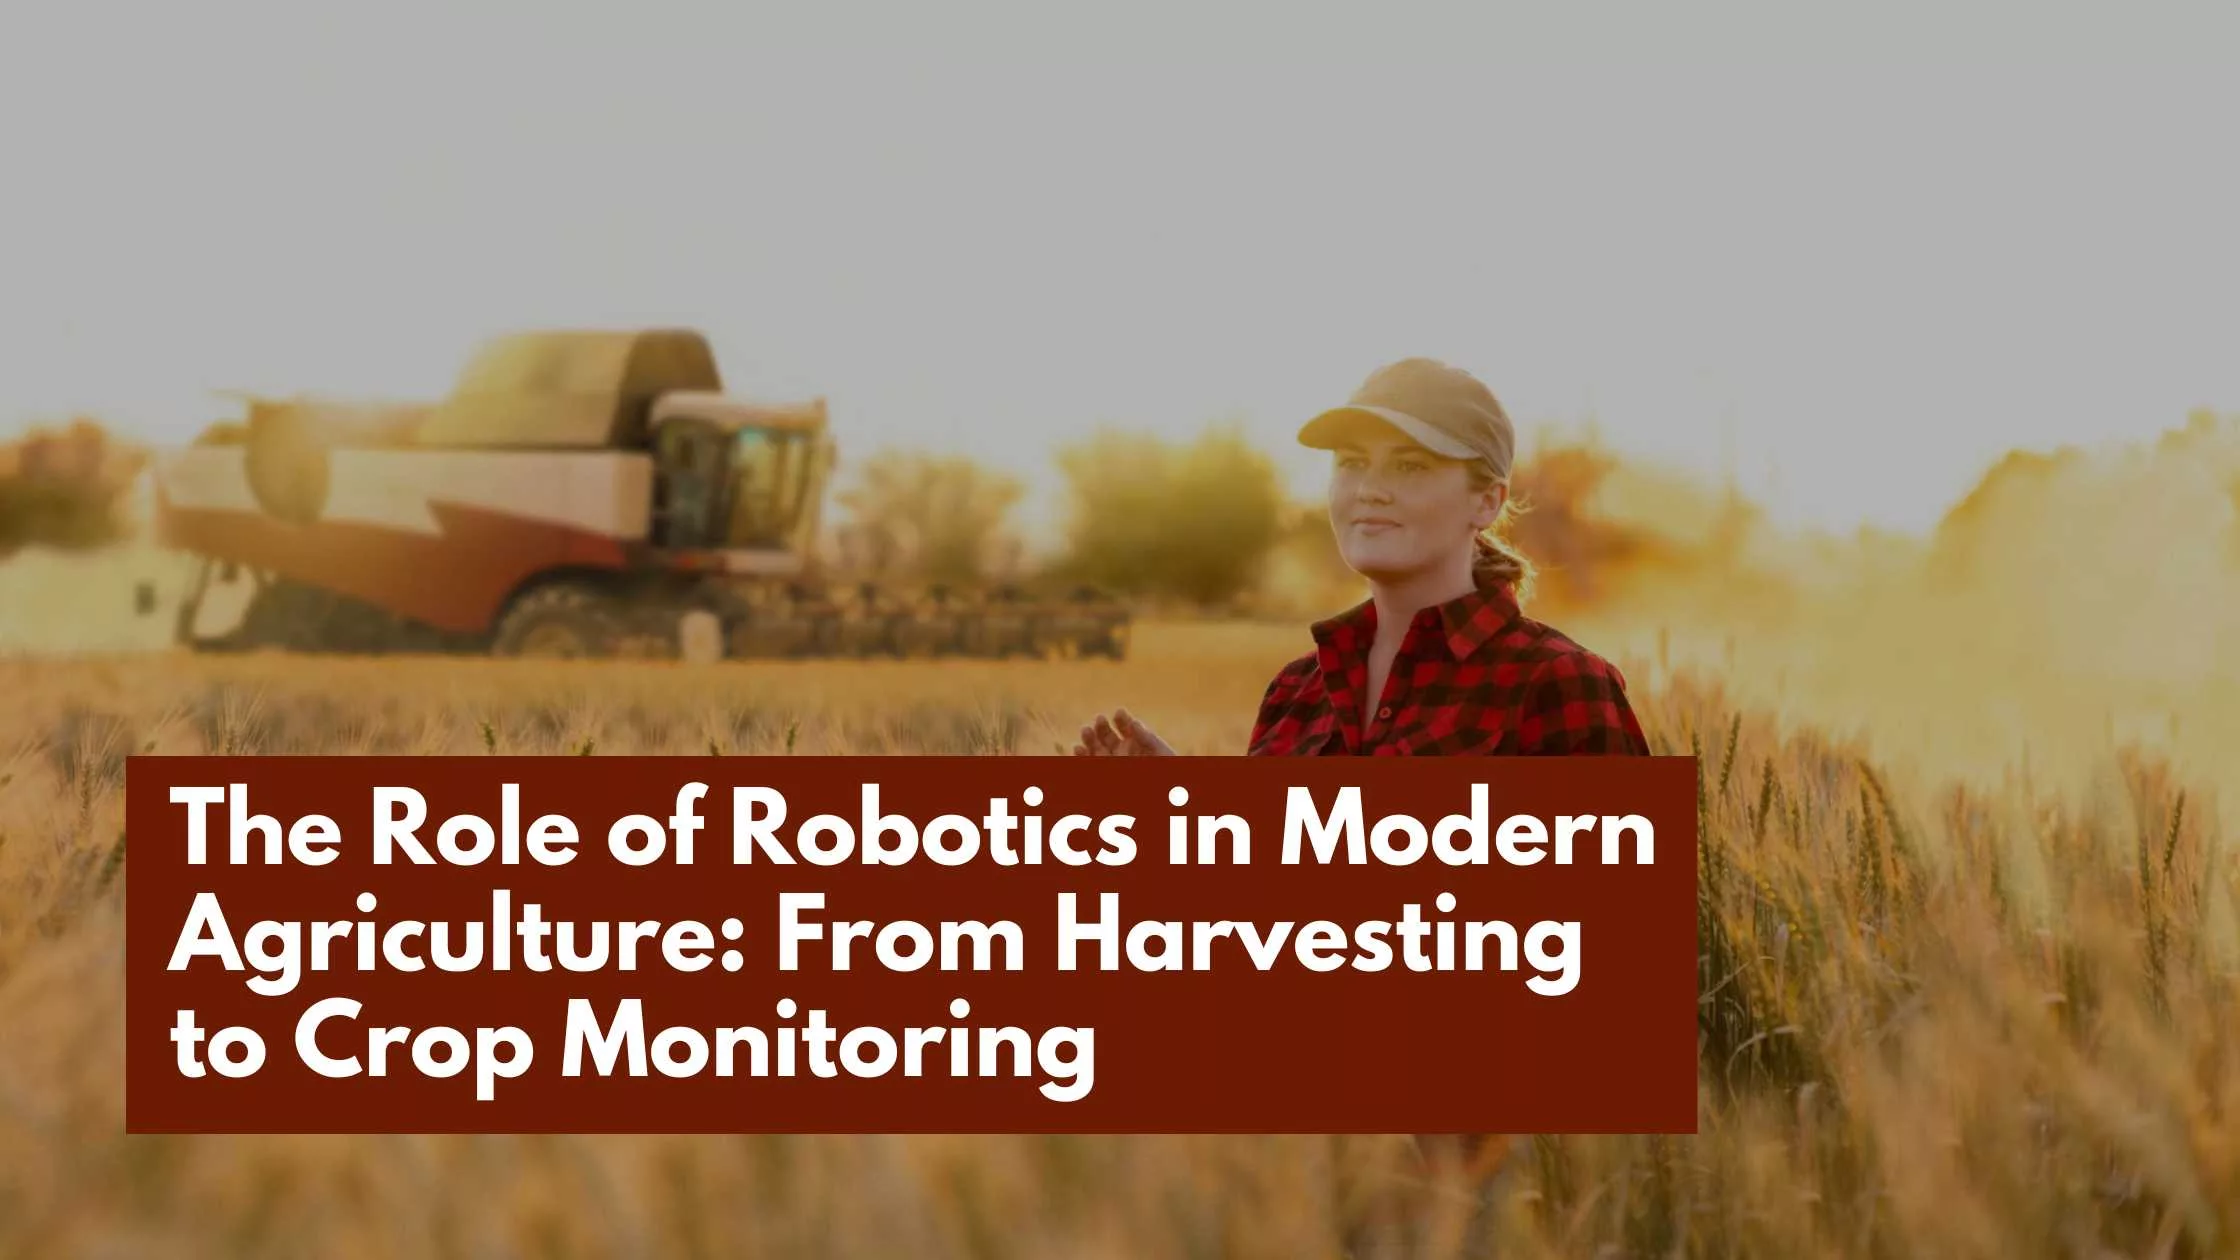 The Role of Robotics in Modern Agriculture